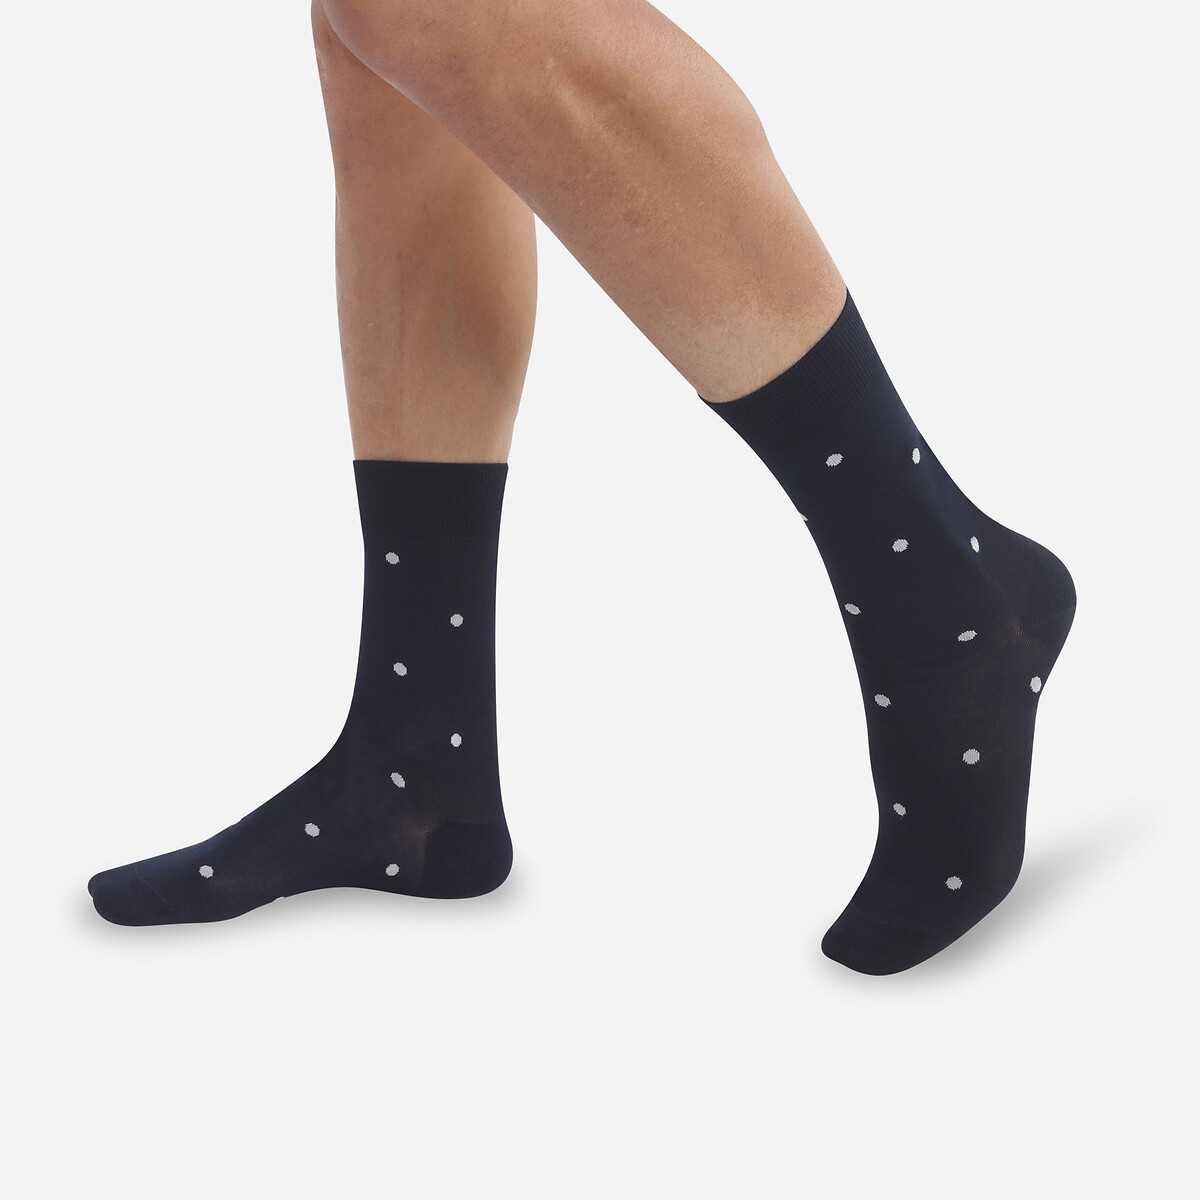 Image of Pack of Crew Socks in Polka Dot Lisle Cotton Mix